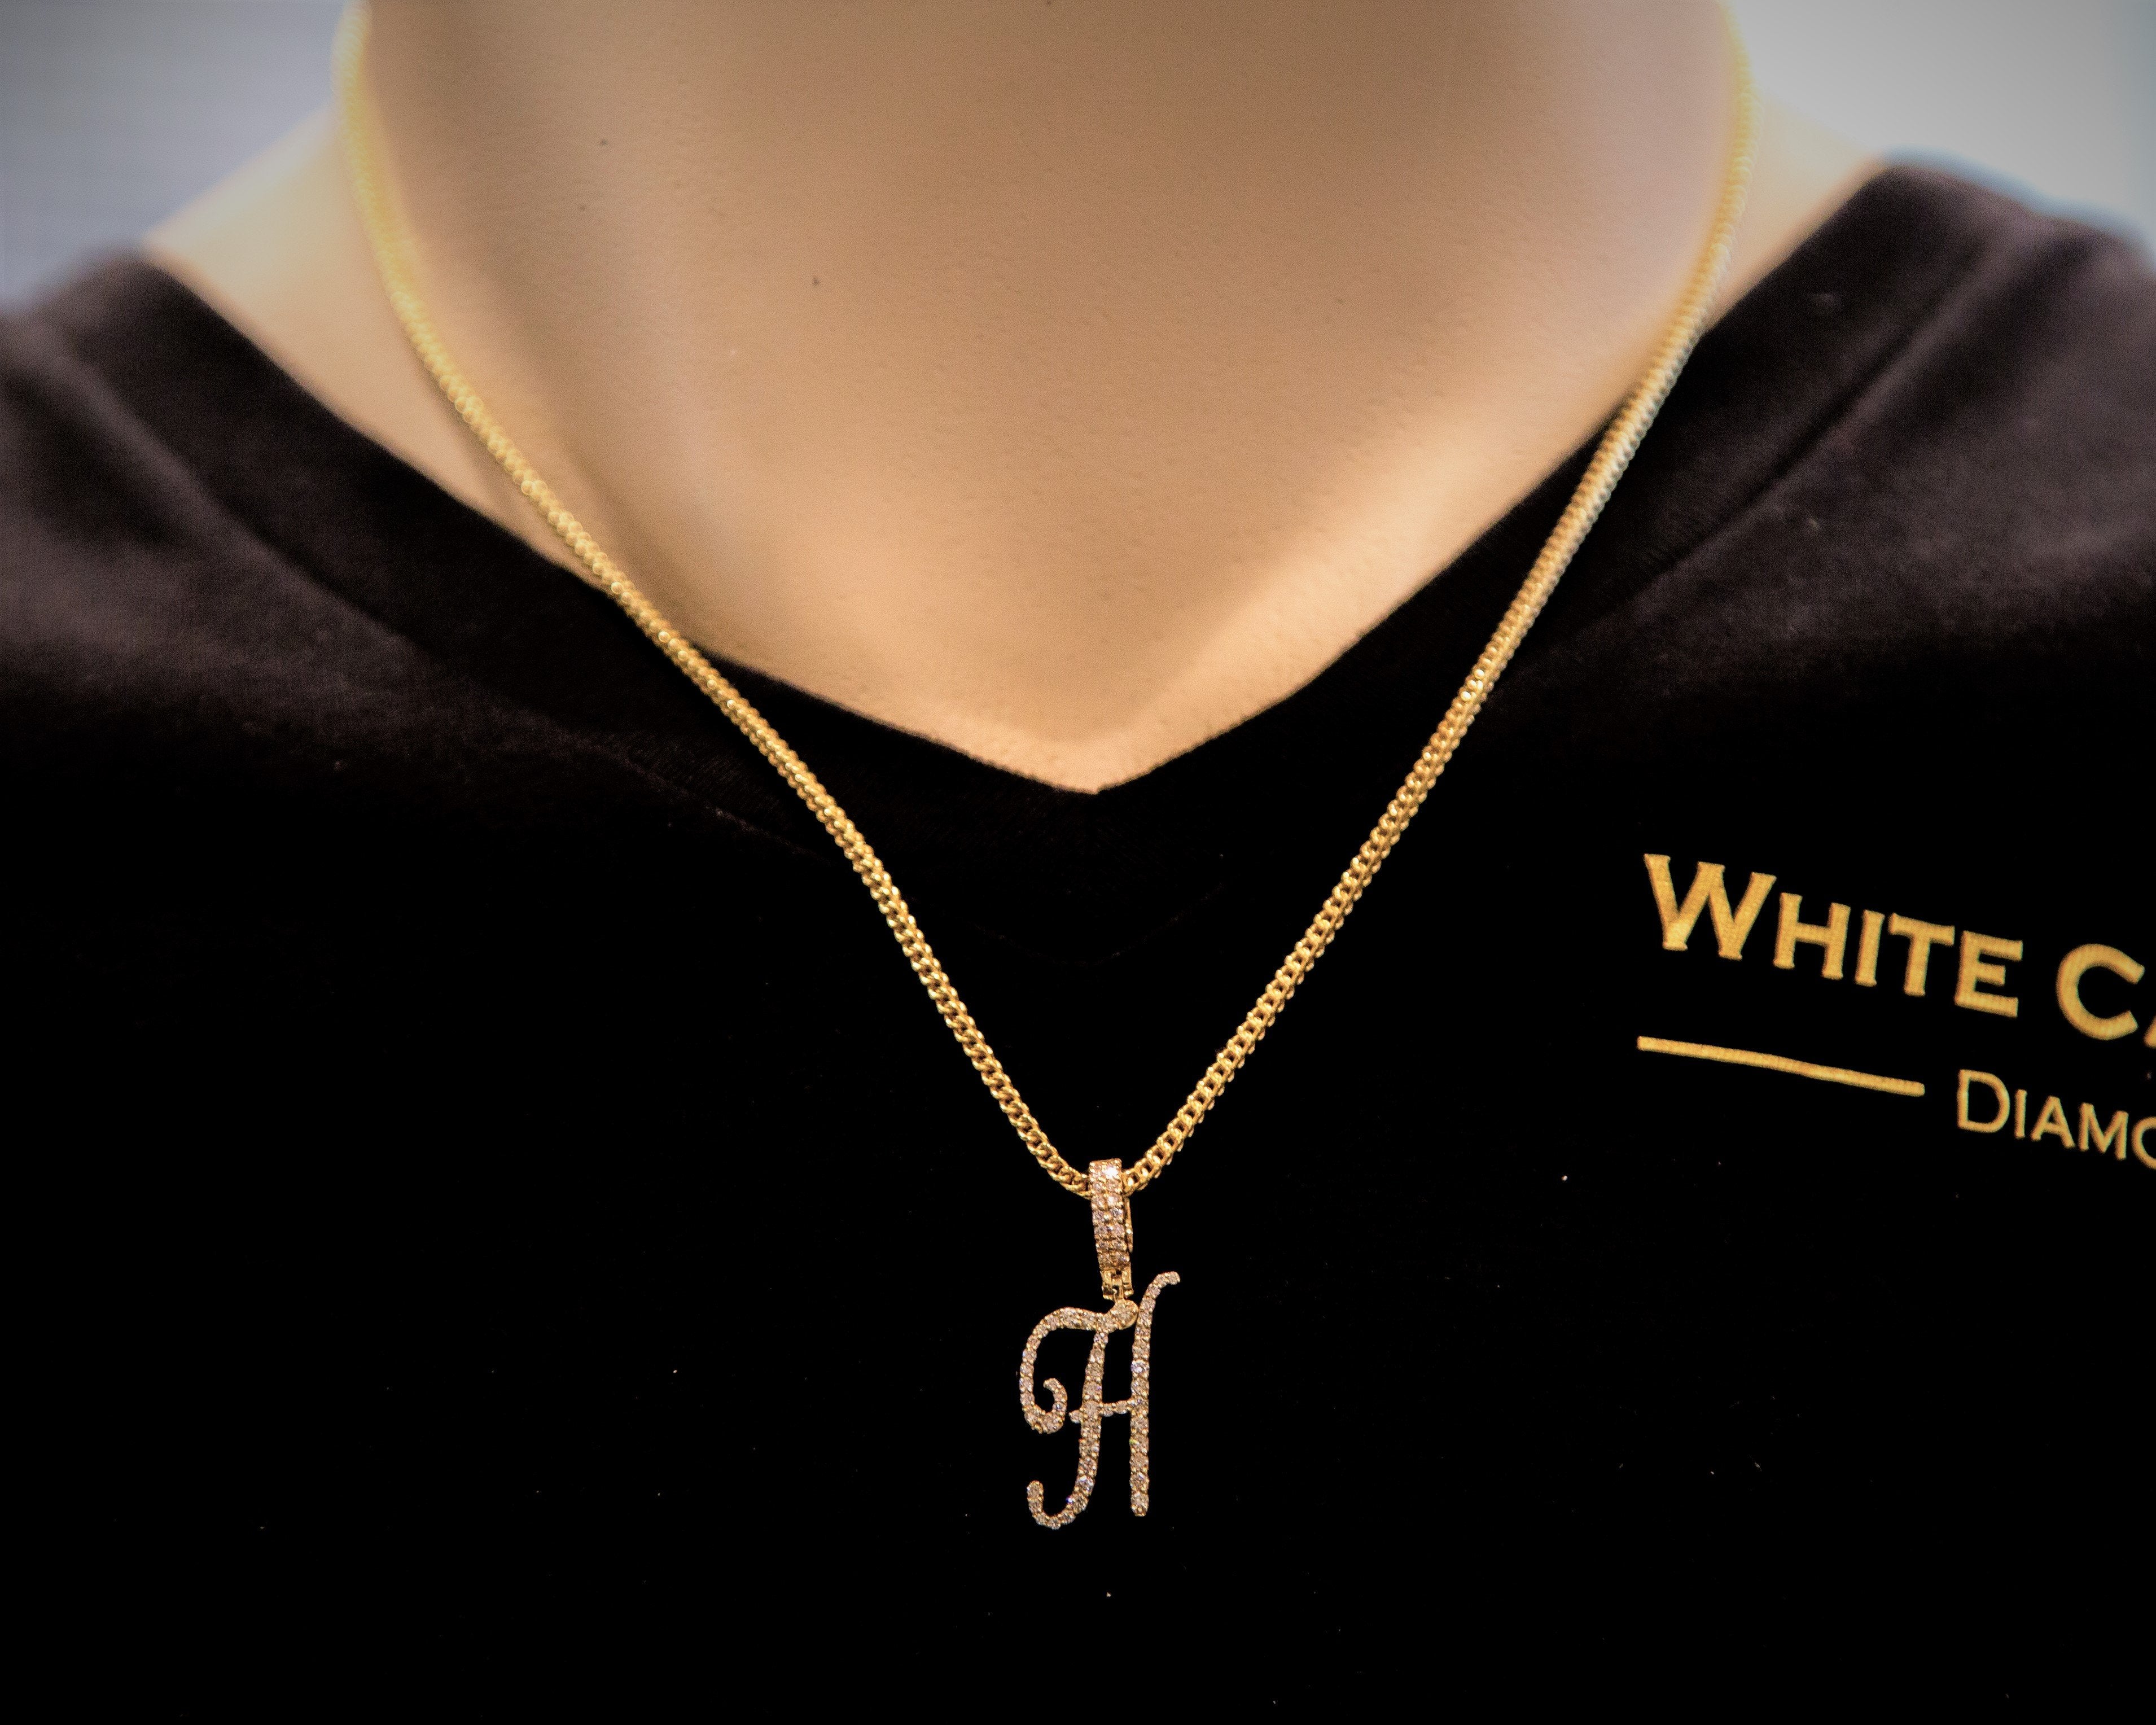 1.00 CT. Diamond Initial "H" Pendant in Gold With Chain - White Carat Diamonds 